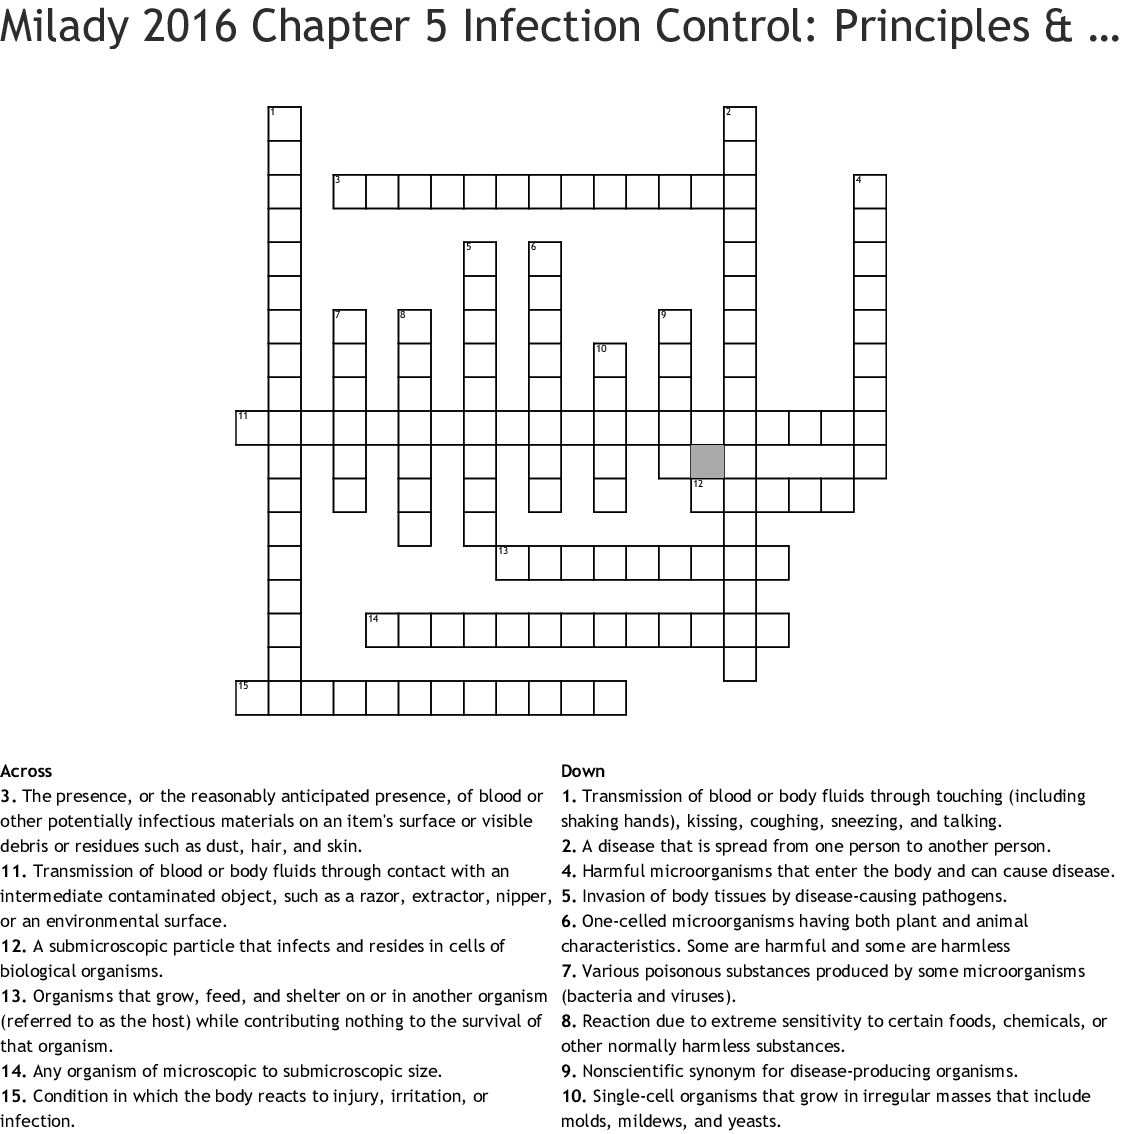 Milady 2016 Chapter 5 Infection Control Principles